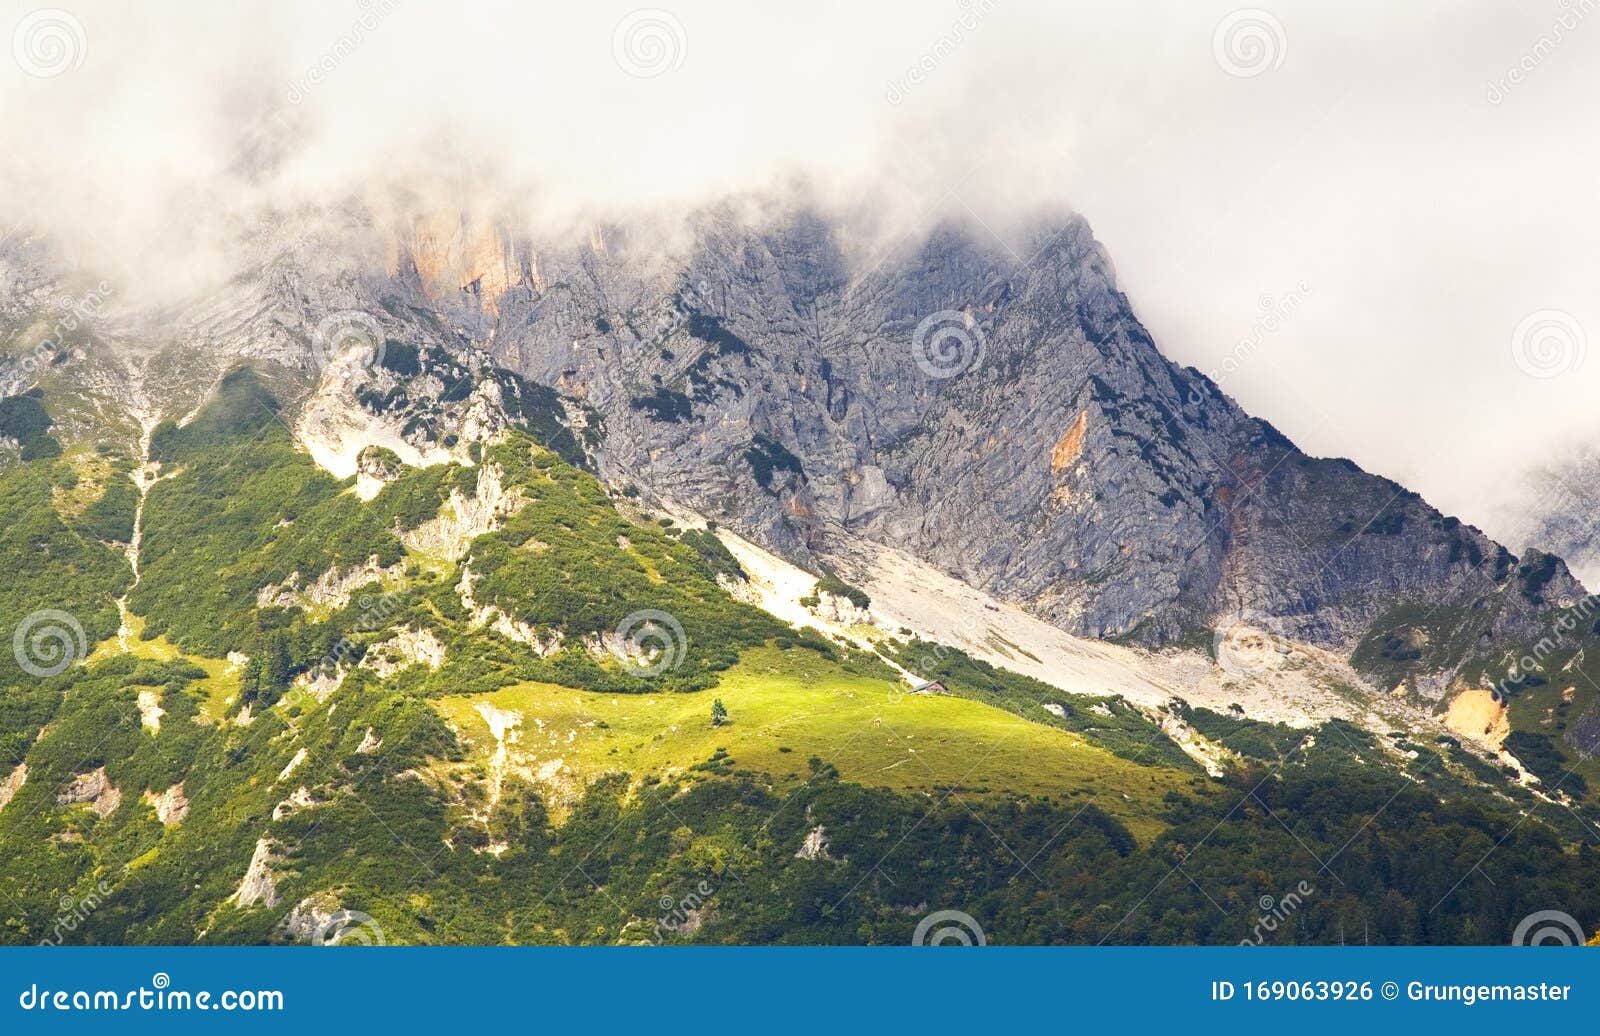 mountains in the alps with cloudy hillsides, alp and chalet